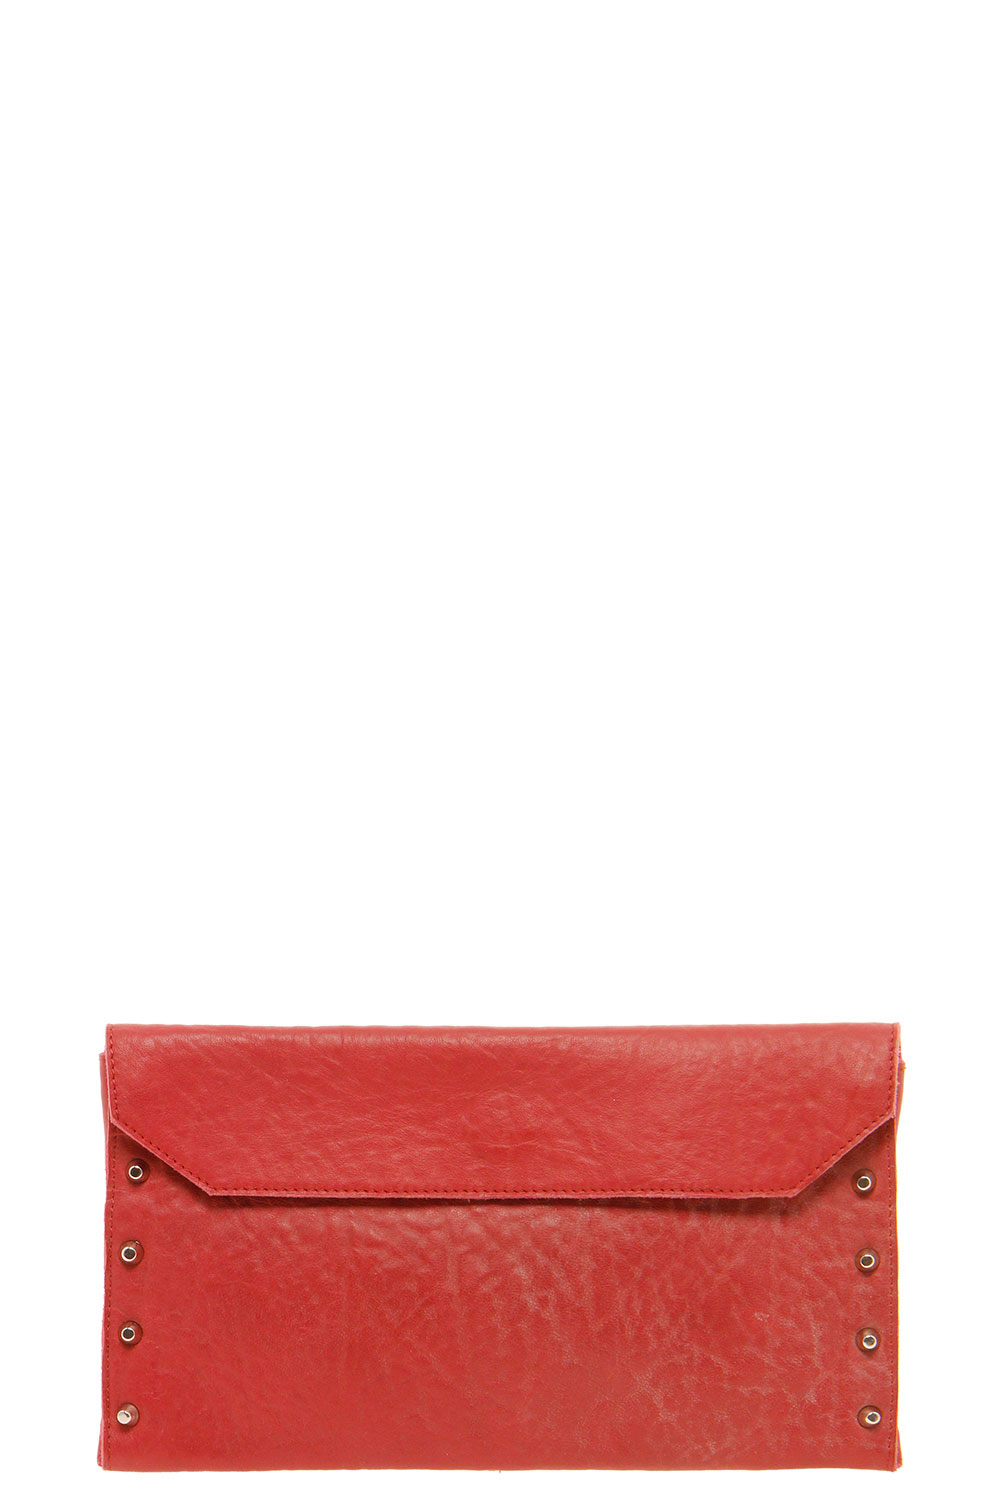 Tilly Leather Stud Clutch Bag - red